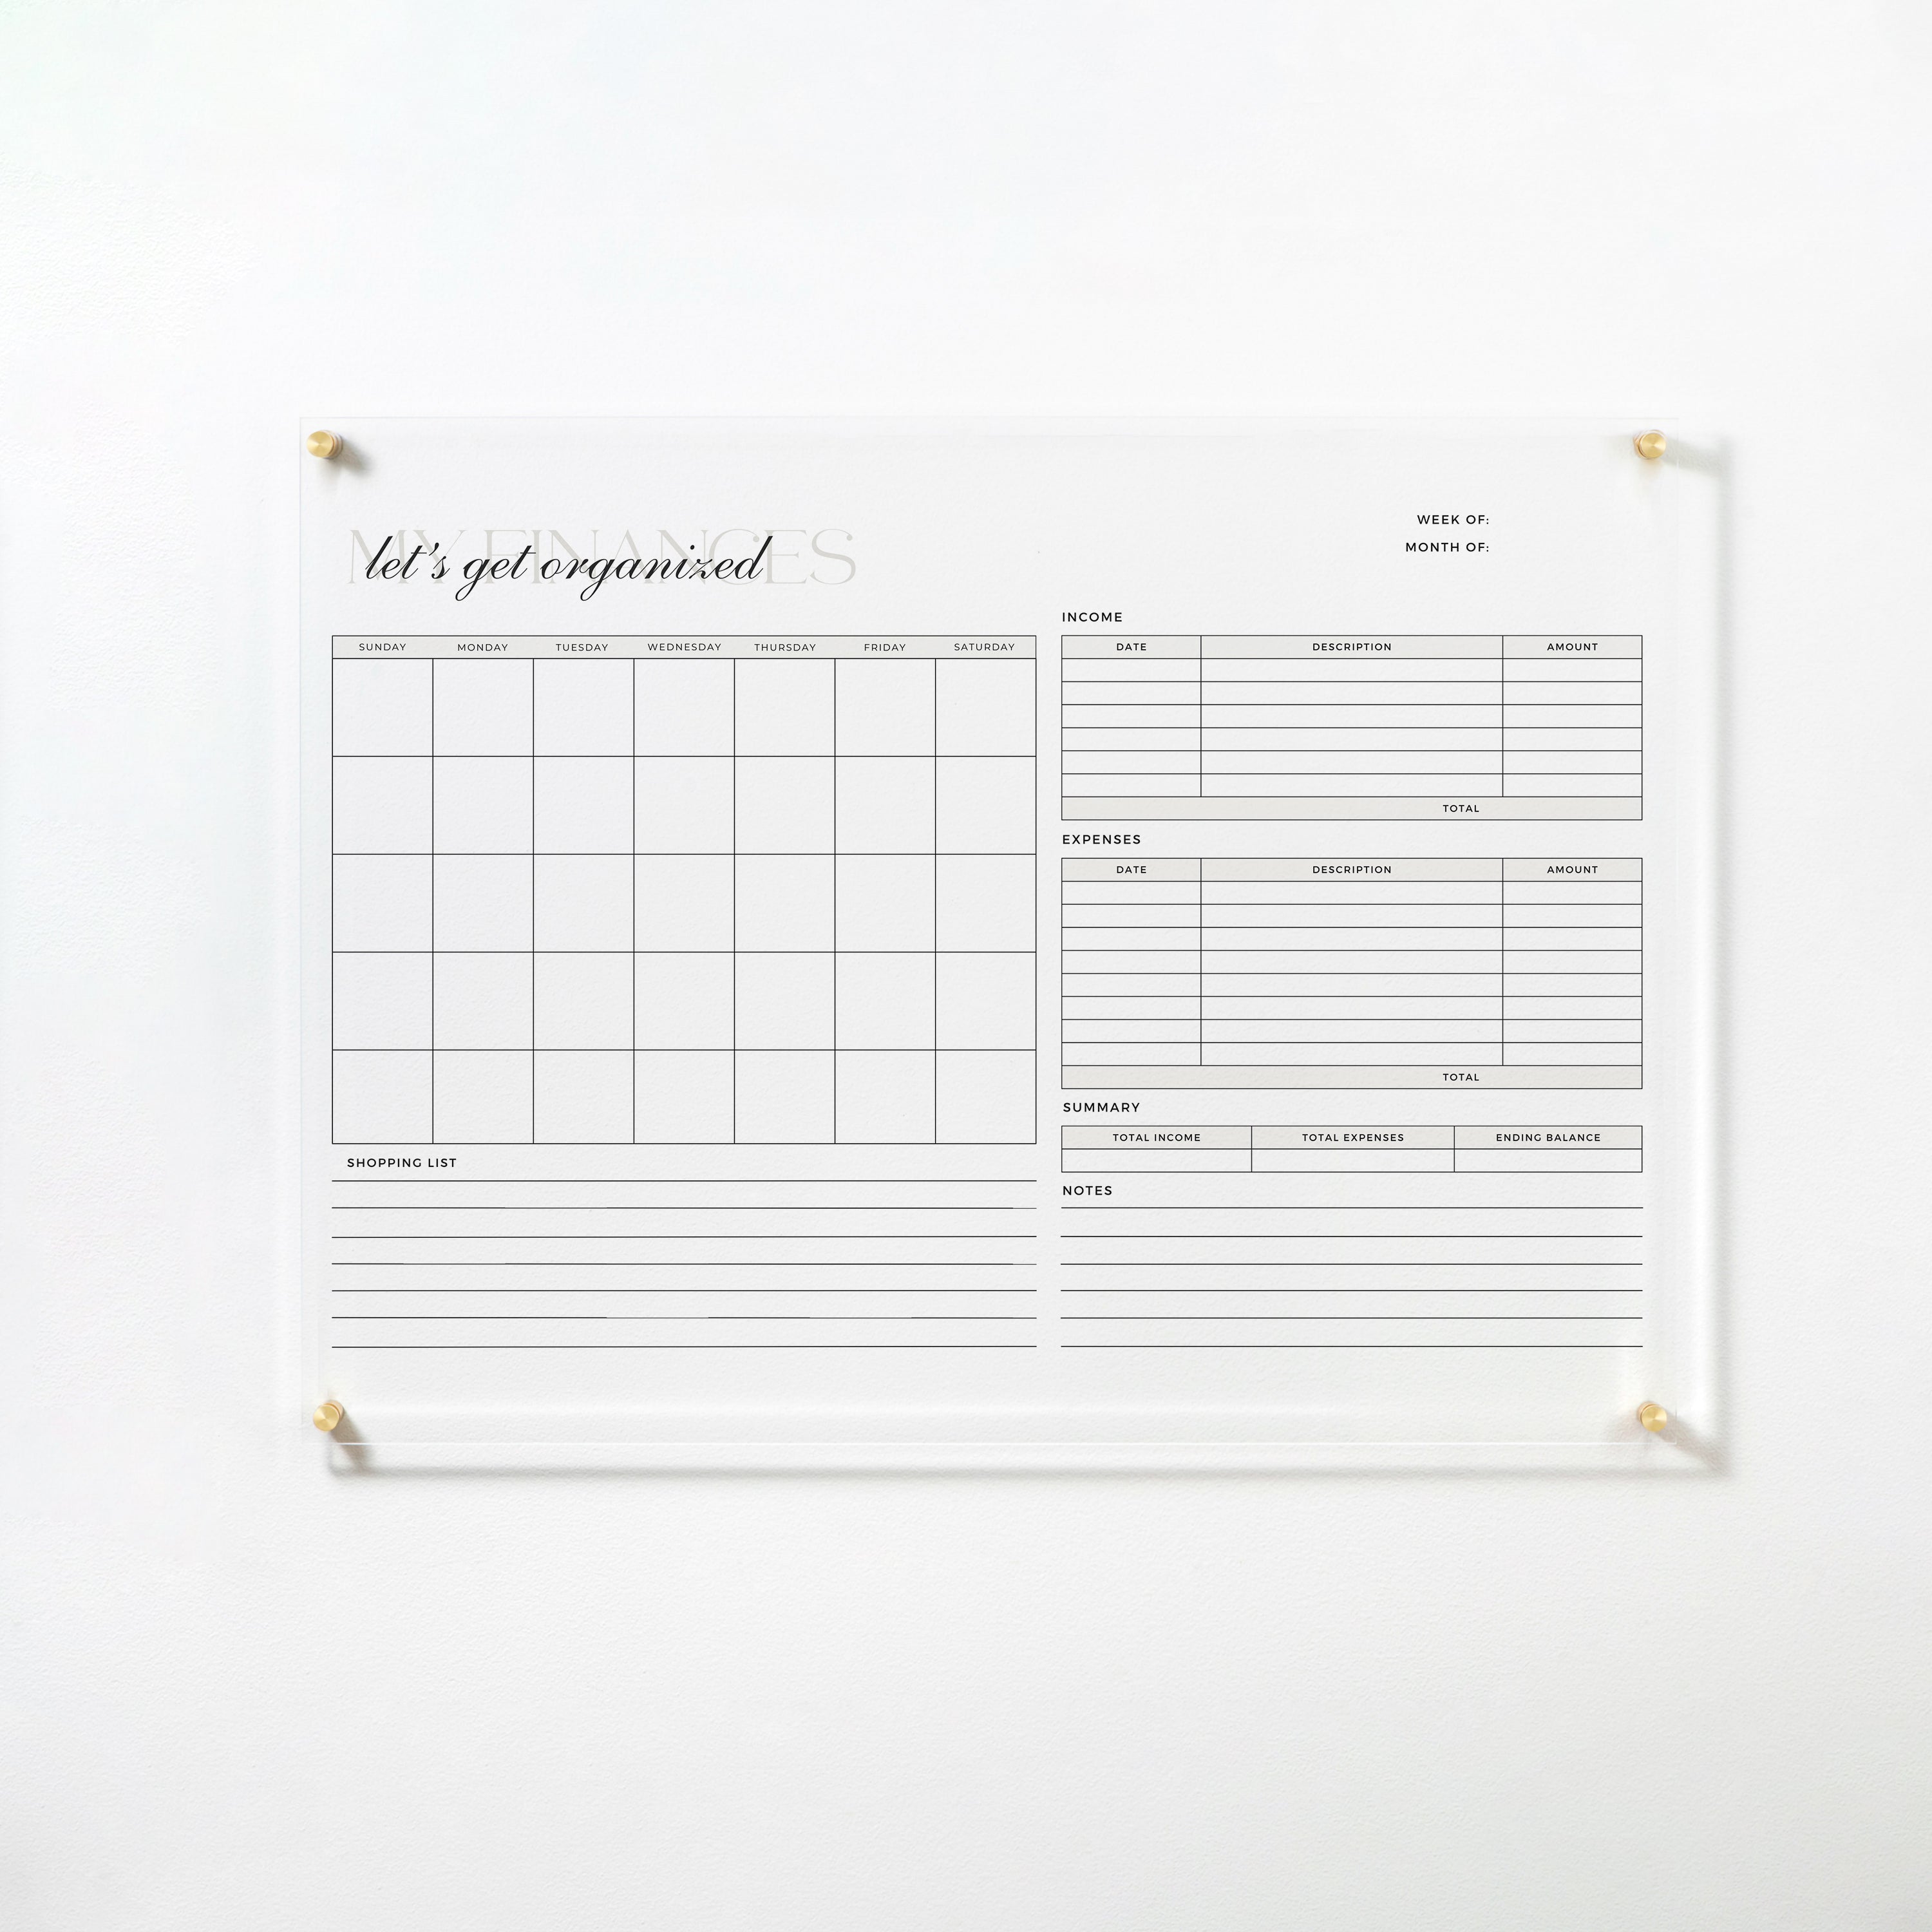 The full view of the same acrylic board, mounted on a white wall with gold pins. The board includes a monthly calendar, sections for tracking income and expenses, a summary area, and notes section, designed to help organize finances efficiently.